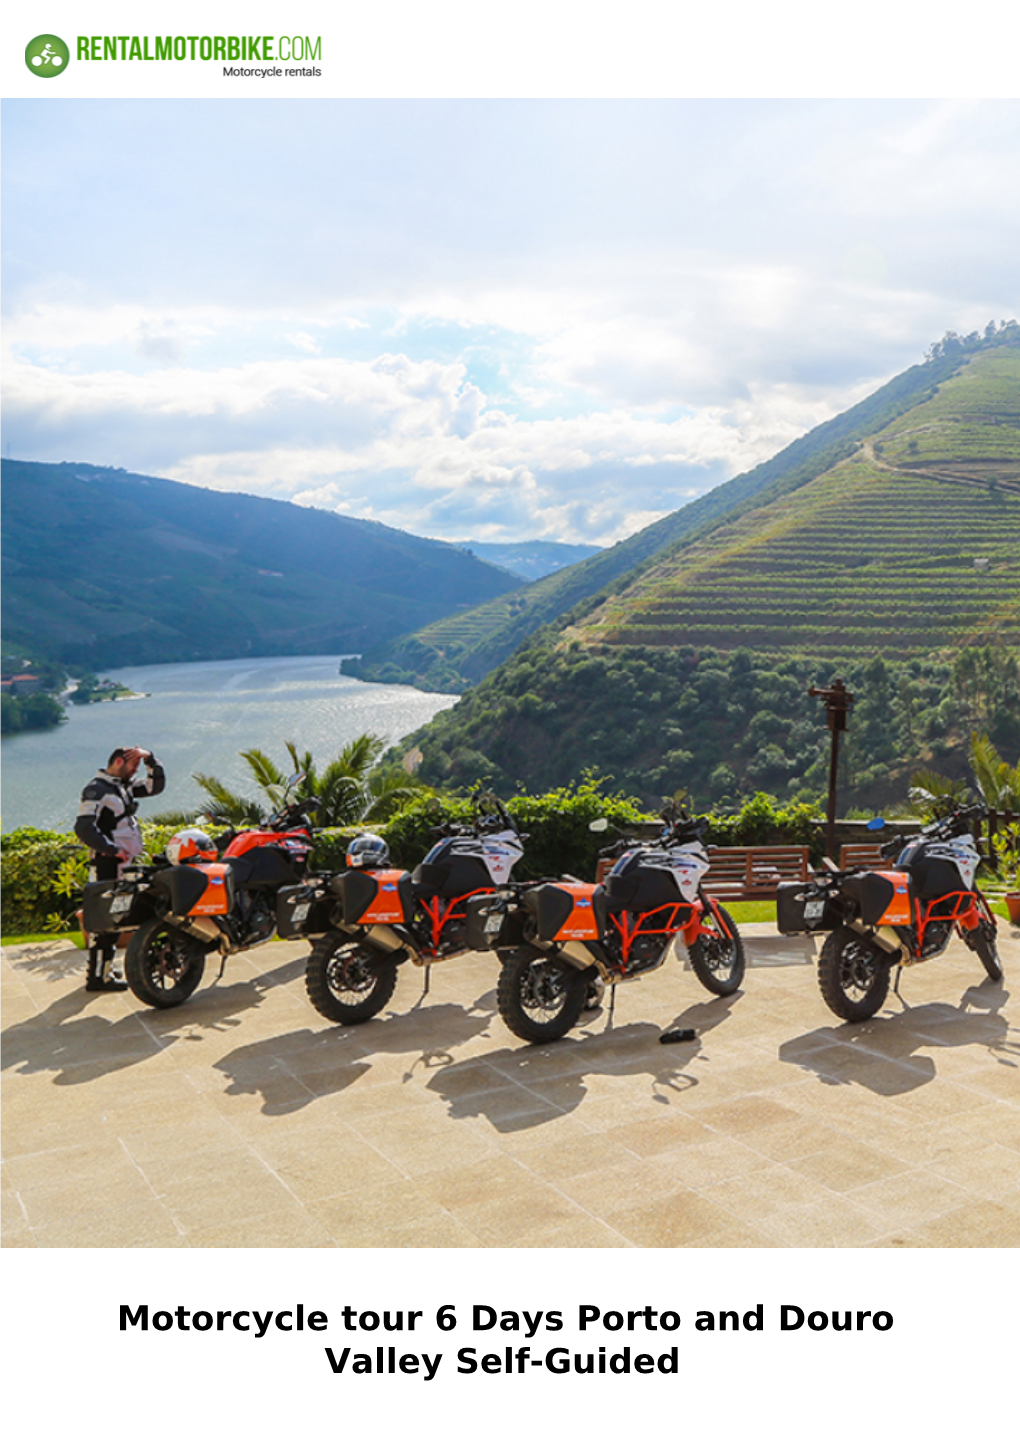 Motorcycle Tour 6 Days Porto and Douro Valley Self-Guided Motorcycle Tour 6 Days Porto and Douro Valley Self-Guided